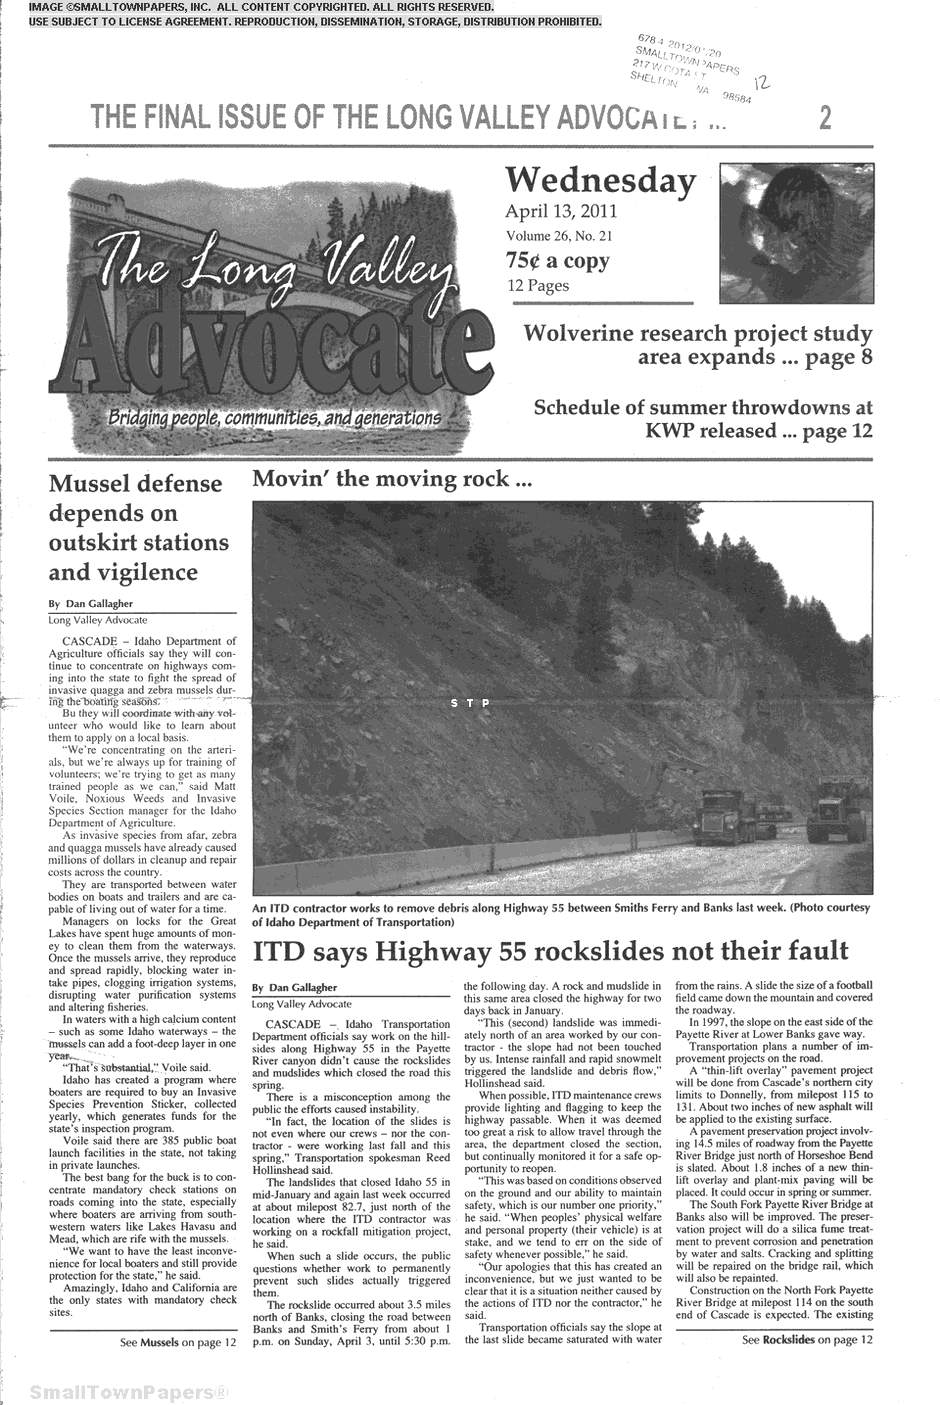 Long Valley Advocate